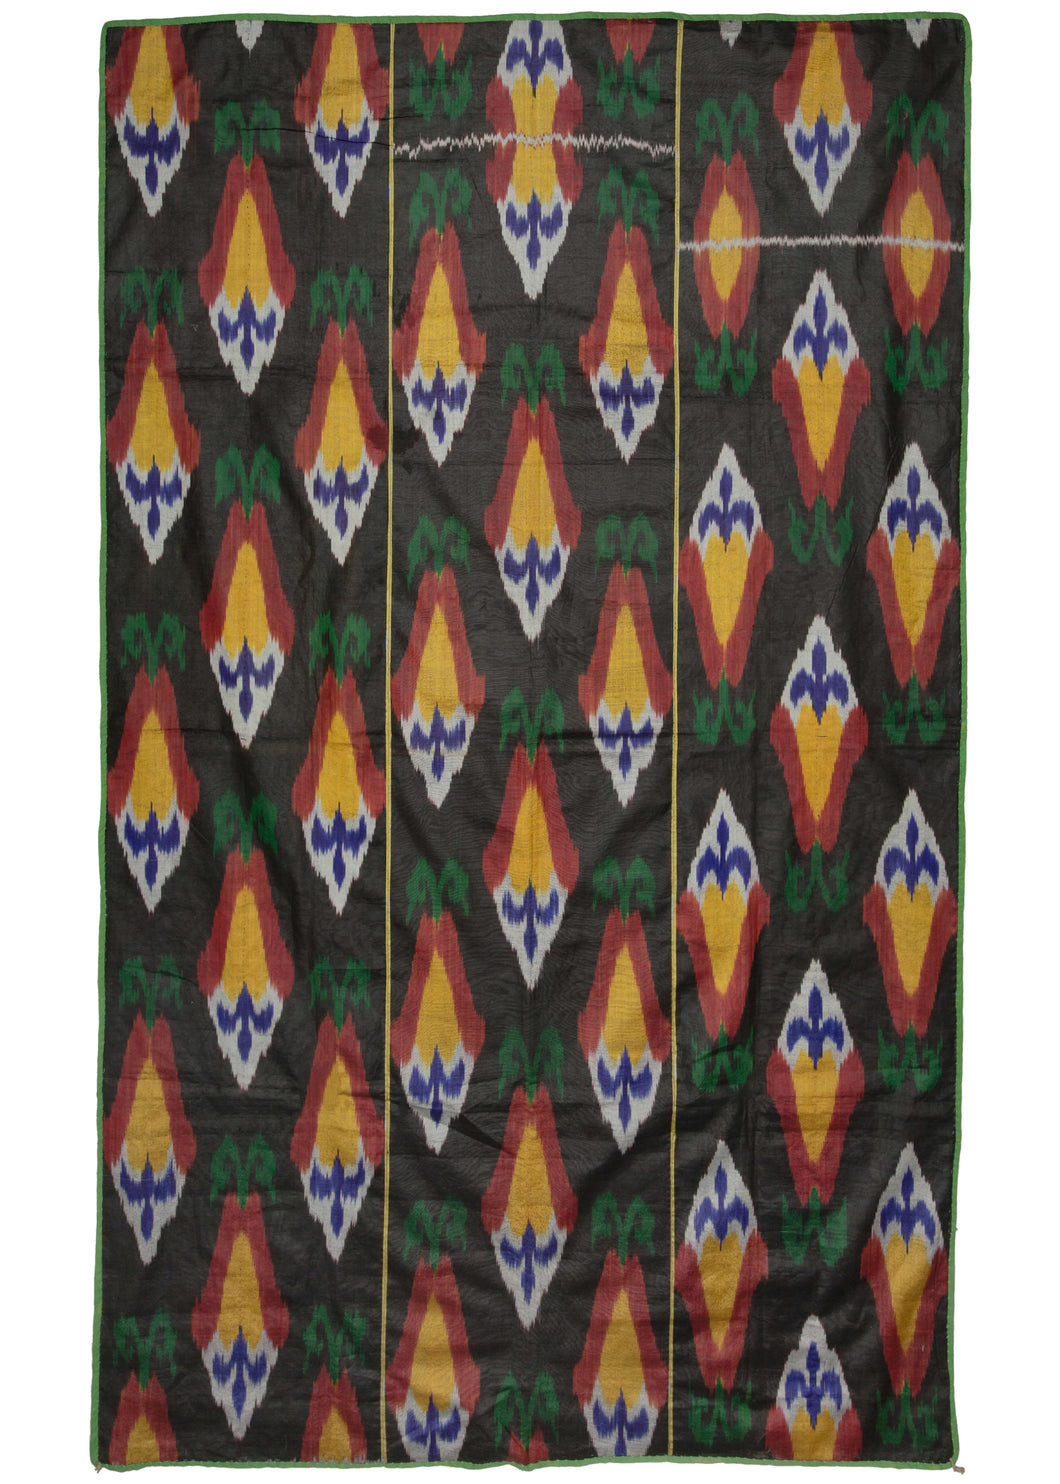 Uzbekistan handwoven silk ikat textile featuring a repeating diamond-like motif in yellow, red, blue, and white atop a black field.